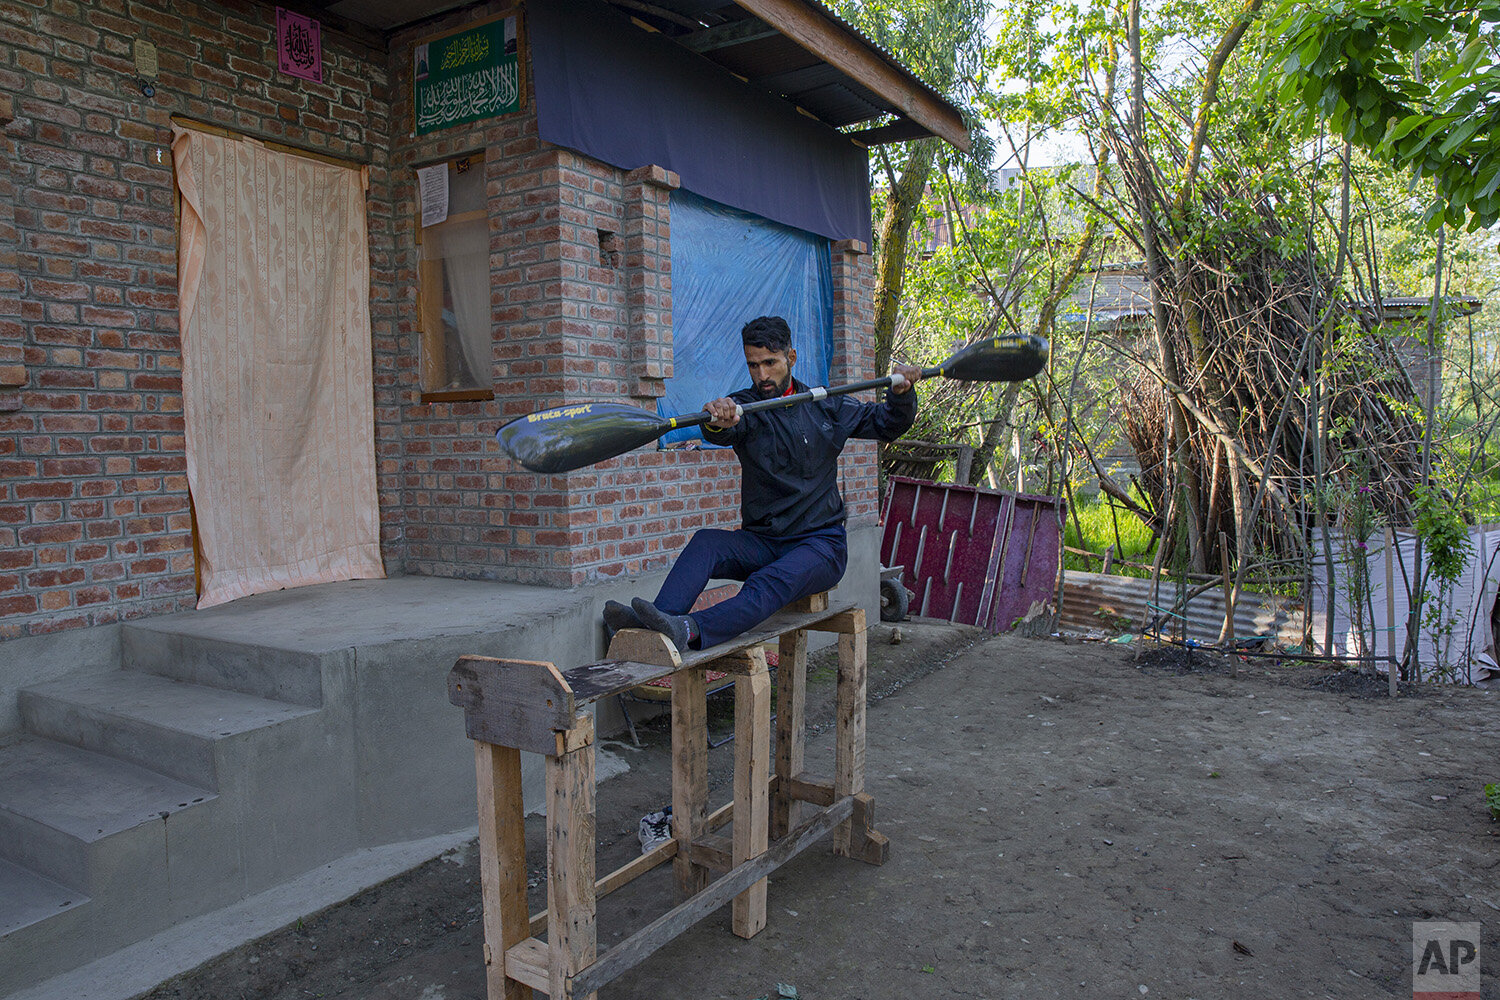  Kashmiri kayaker Vilayat Hussain practices on a rugged under-construction wooden ergometer at his home on the outskirts of Srinagar, Indian controlled Kashmir, April 24, 2020. Like many other athletes, the coronavirus pandemic has restricted Hussain